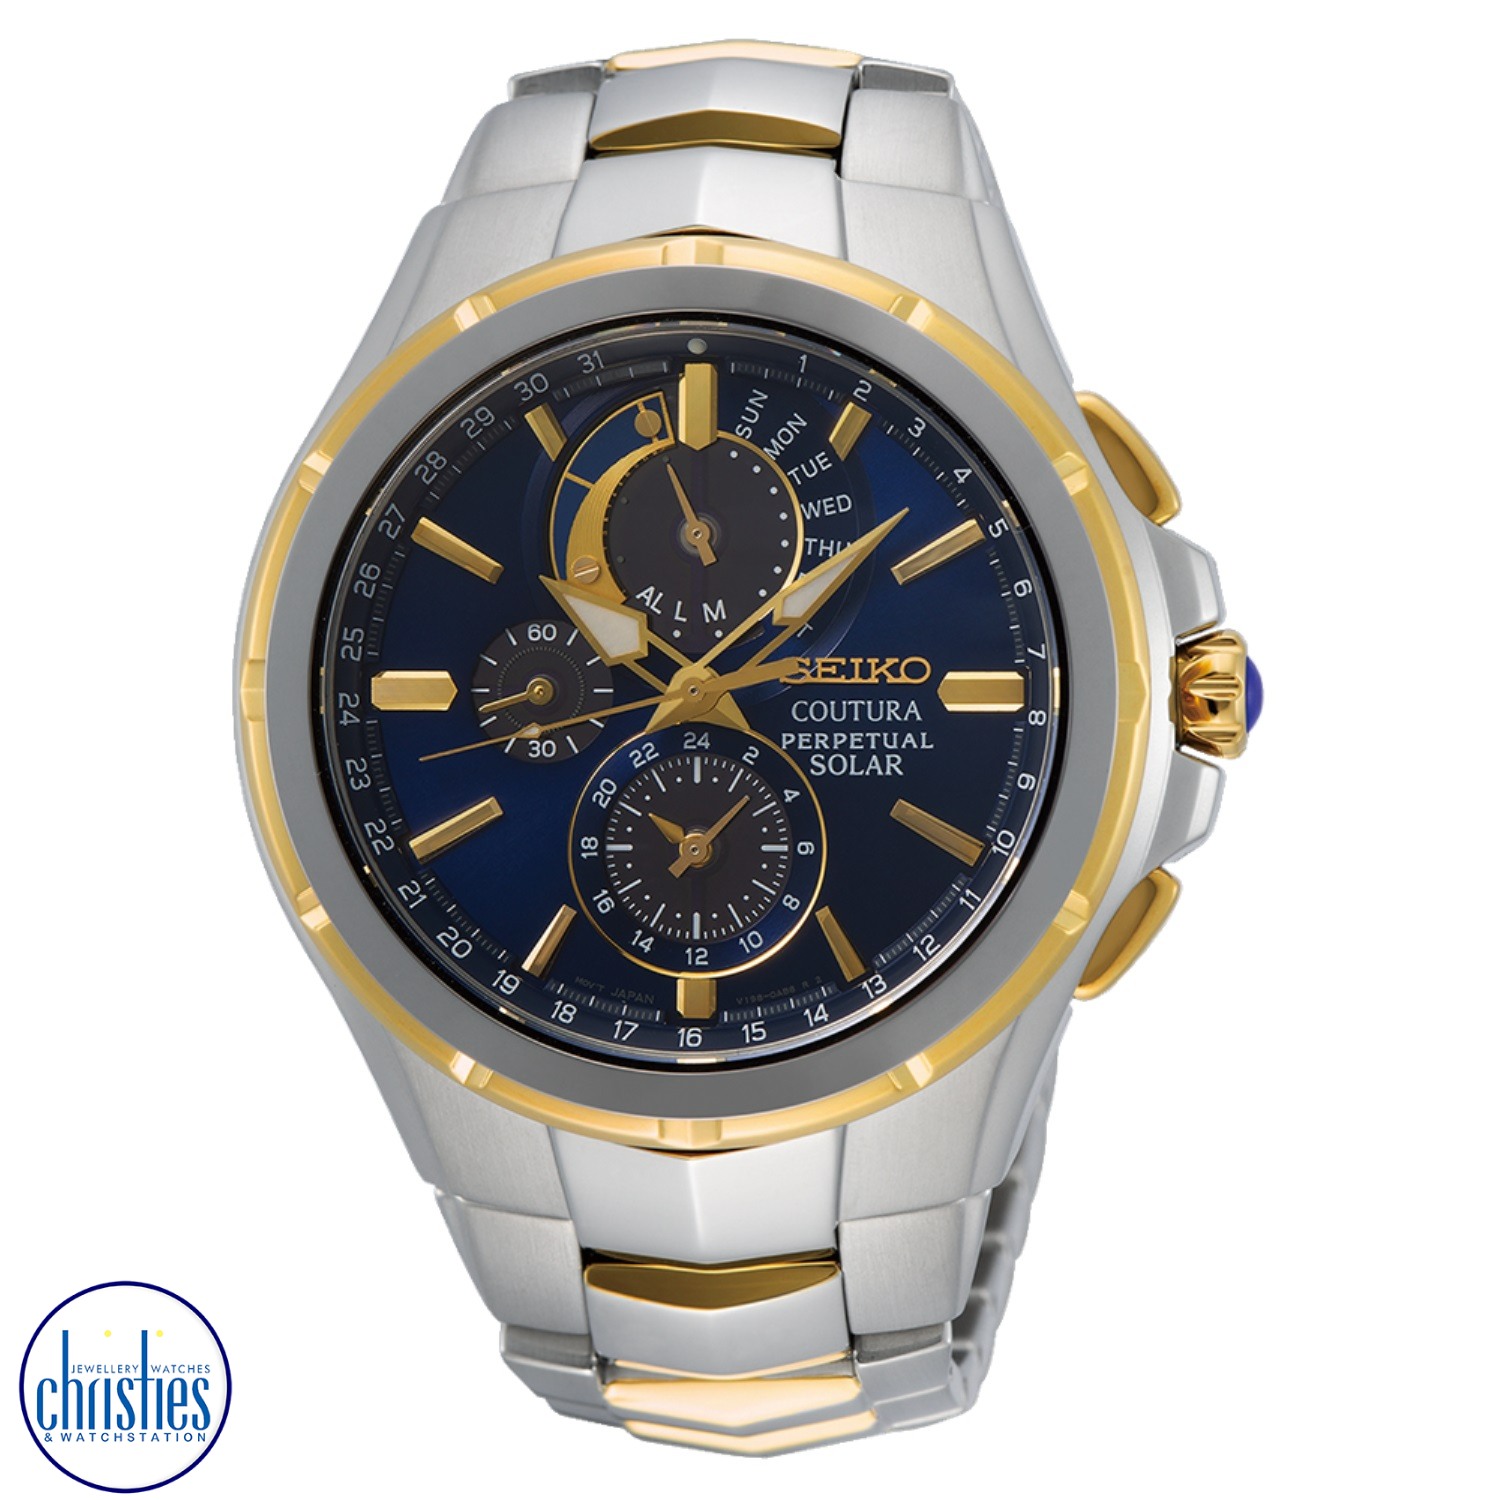 SSC798P1 SEIKO Coutura Perpetual Solar Watch. This is the  SEIKO SSC798 Coutura Perpetual Solar Watch 	3 Months No Payments and Interest for Q Card holders	Movement Type - Solar	Accuracy - ±15 seconds per month	Duration - Operating for approx.